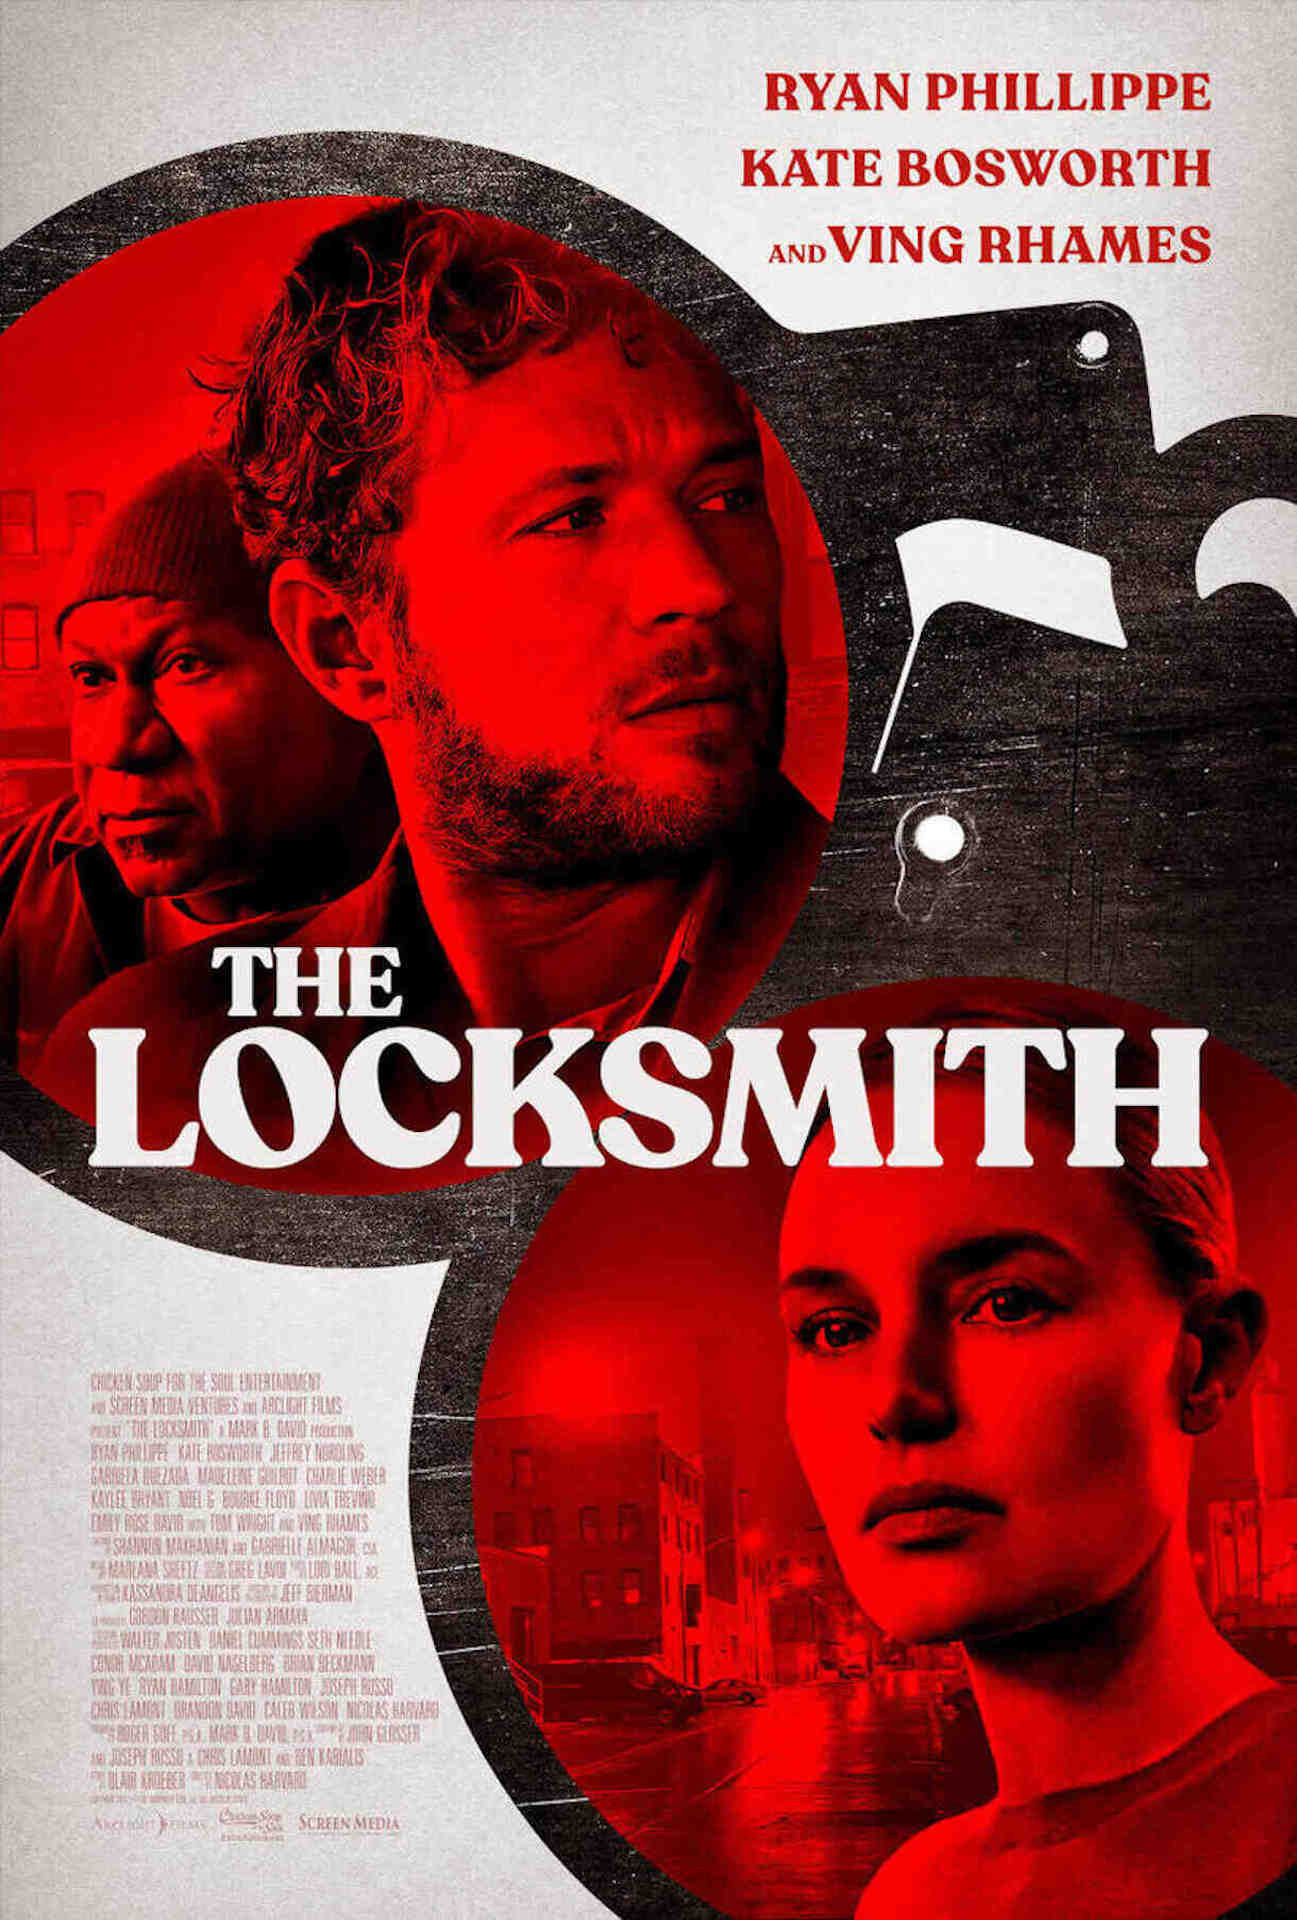 Theatrical poster for The Locksmith, courtesy of Screen Media.